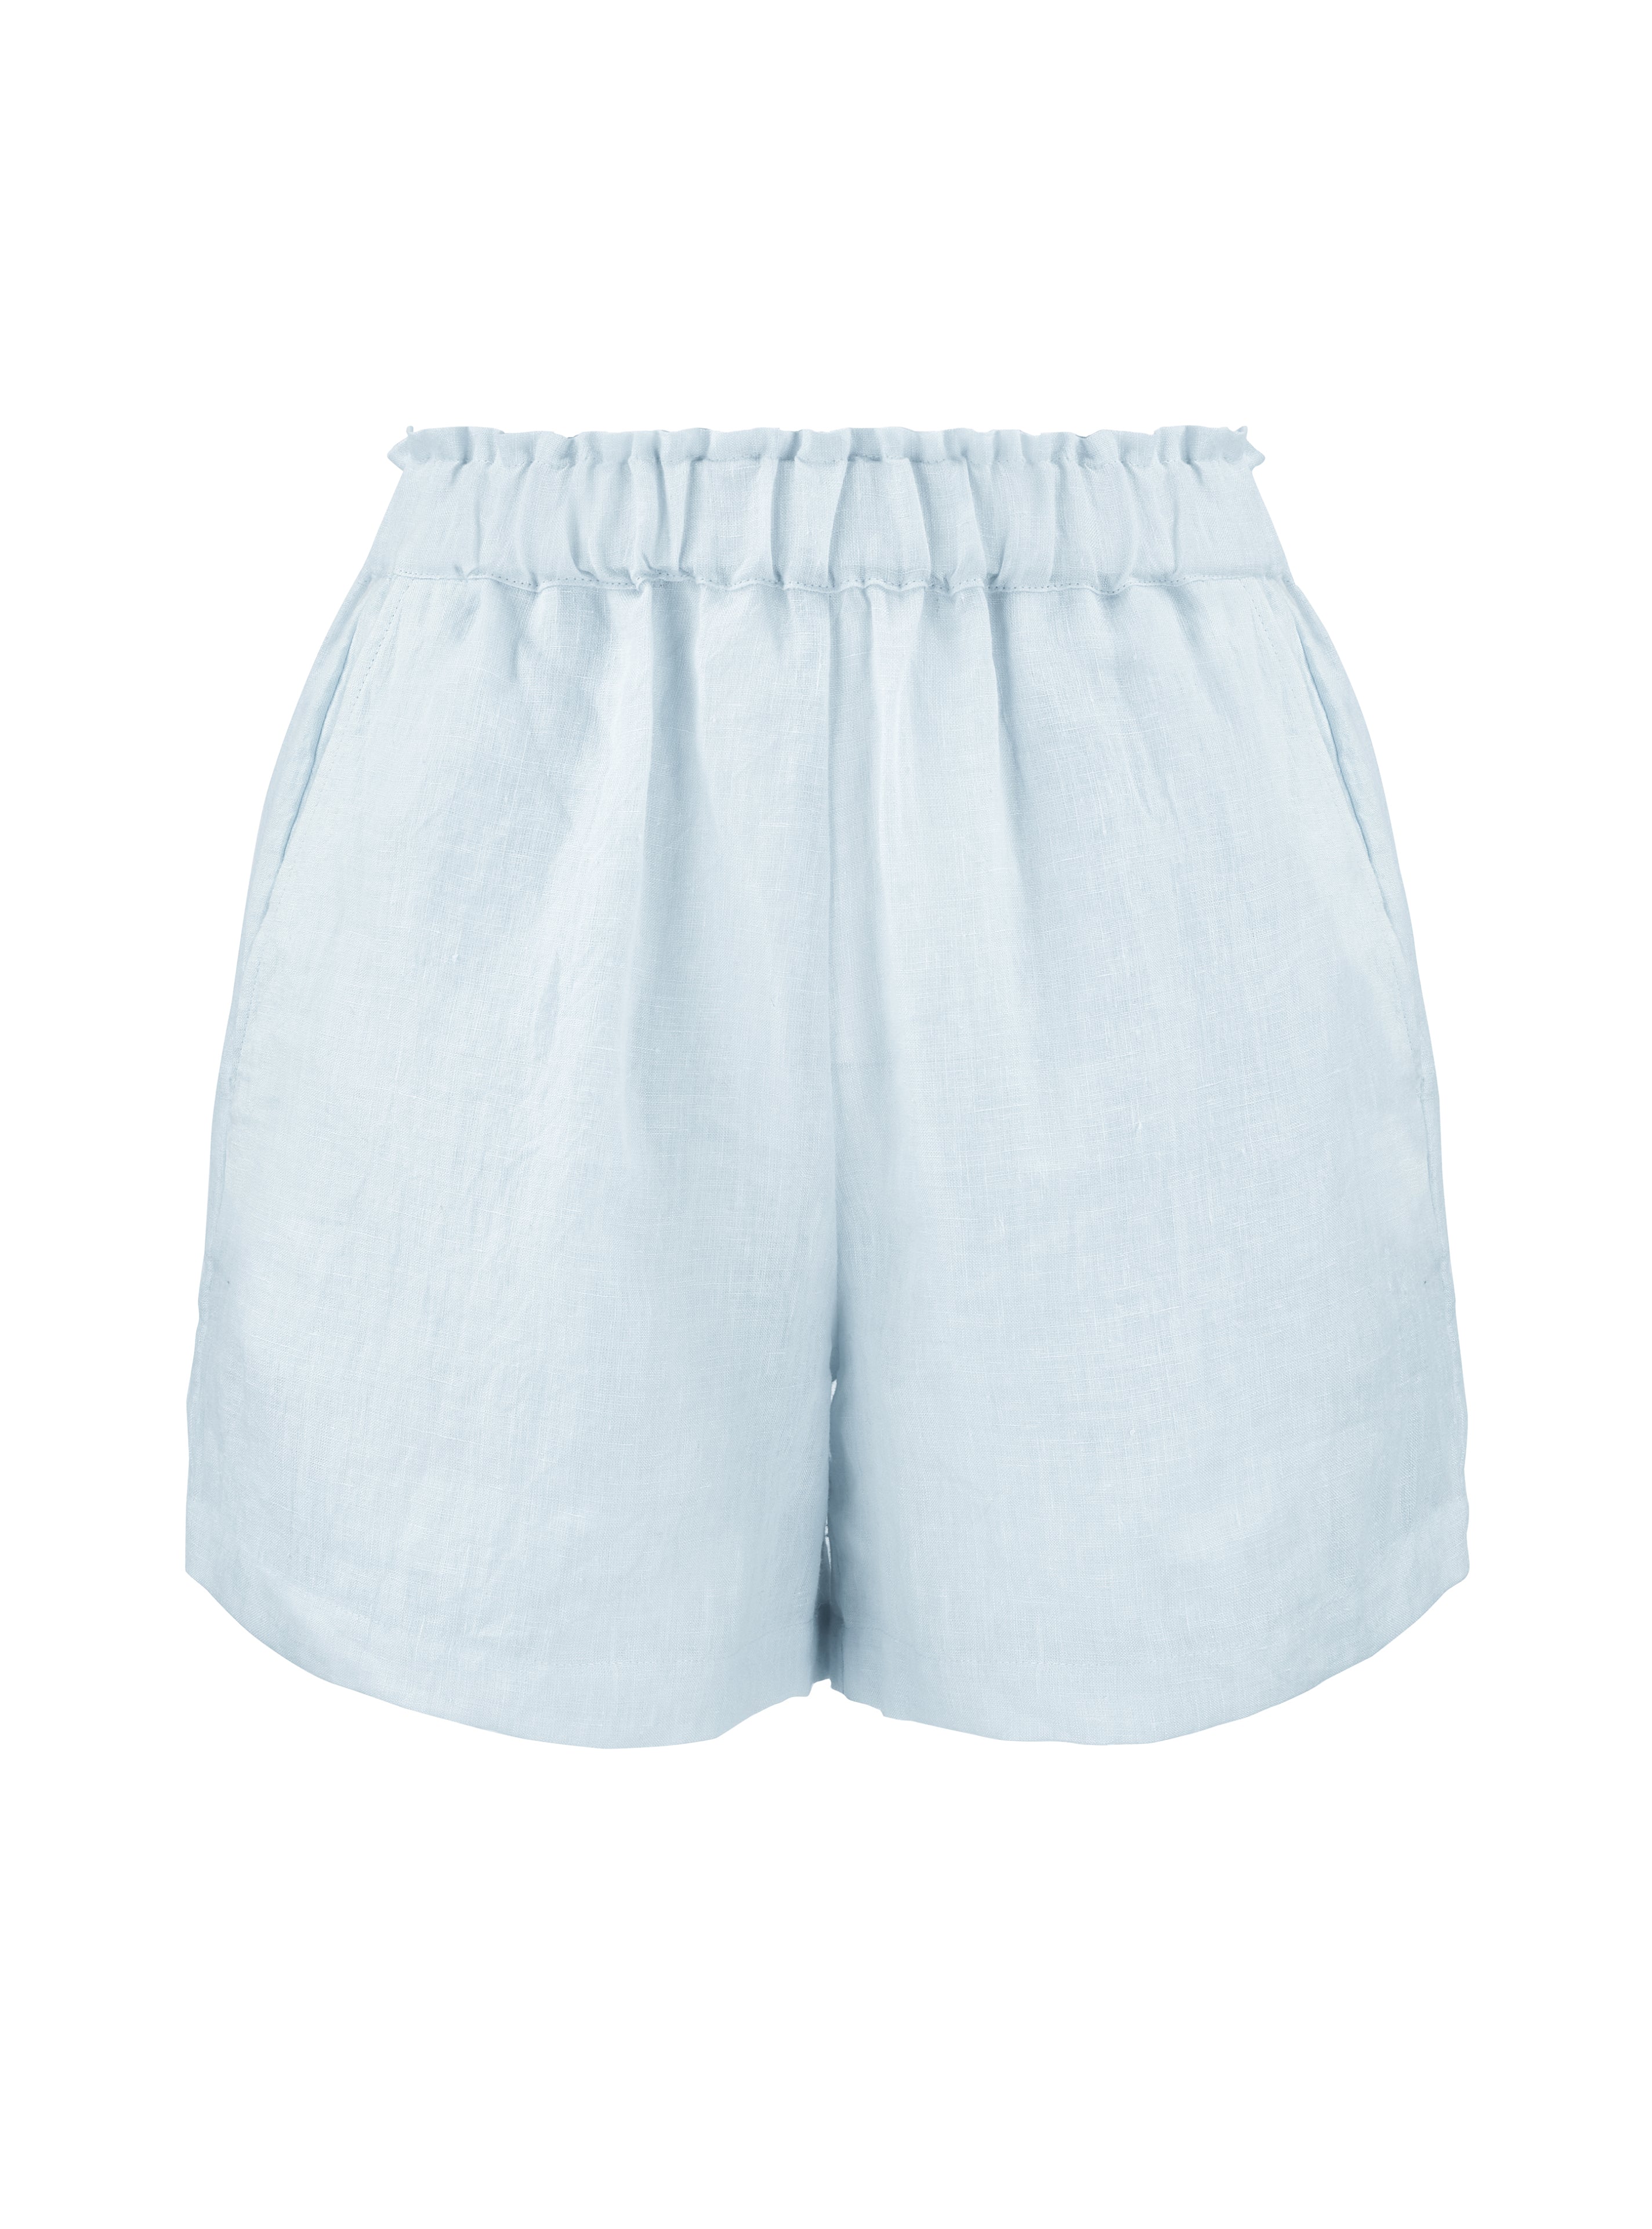 SaleFrank and Oak Linen-Tencel High Waisted Shorts in Blue at